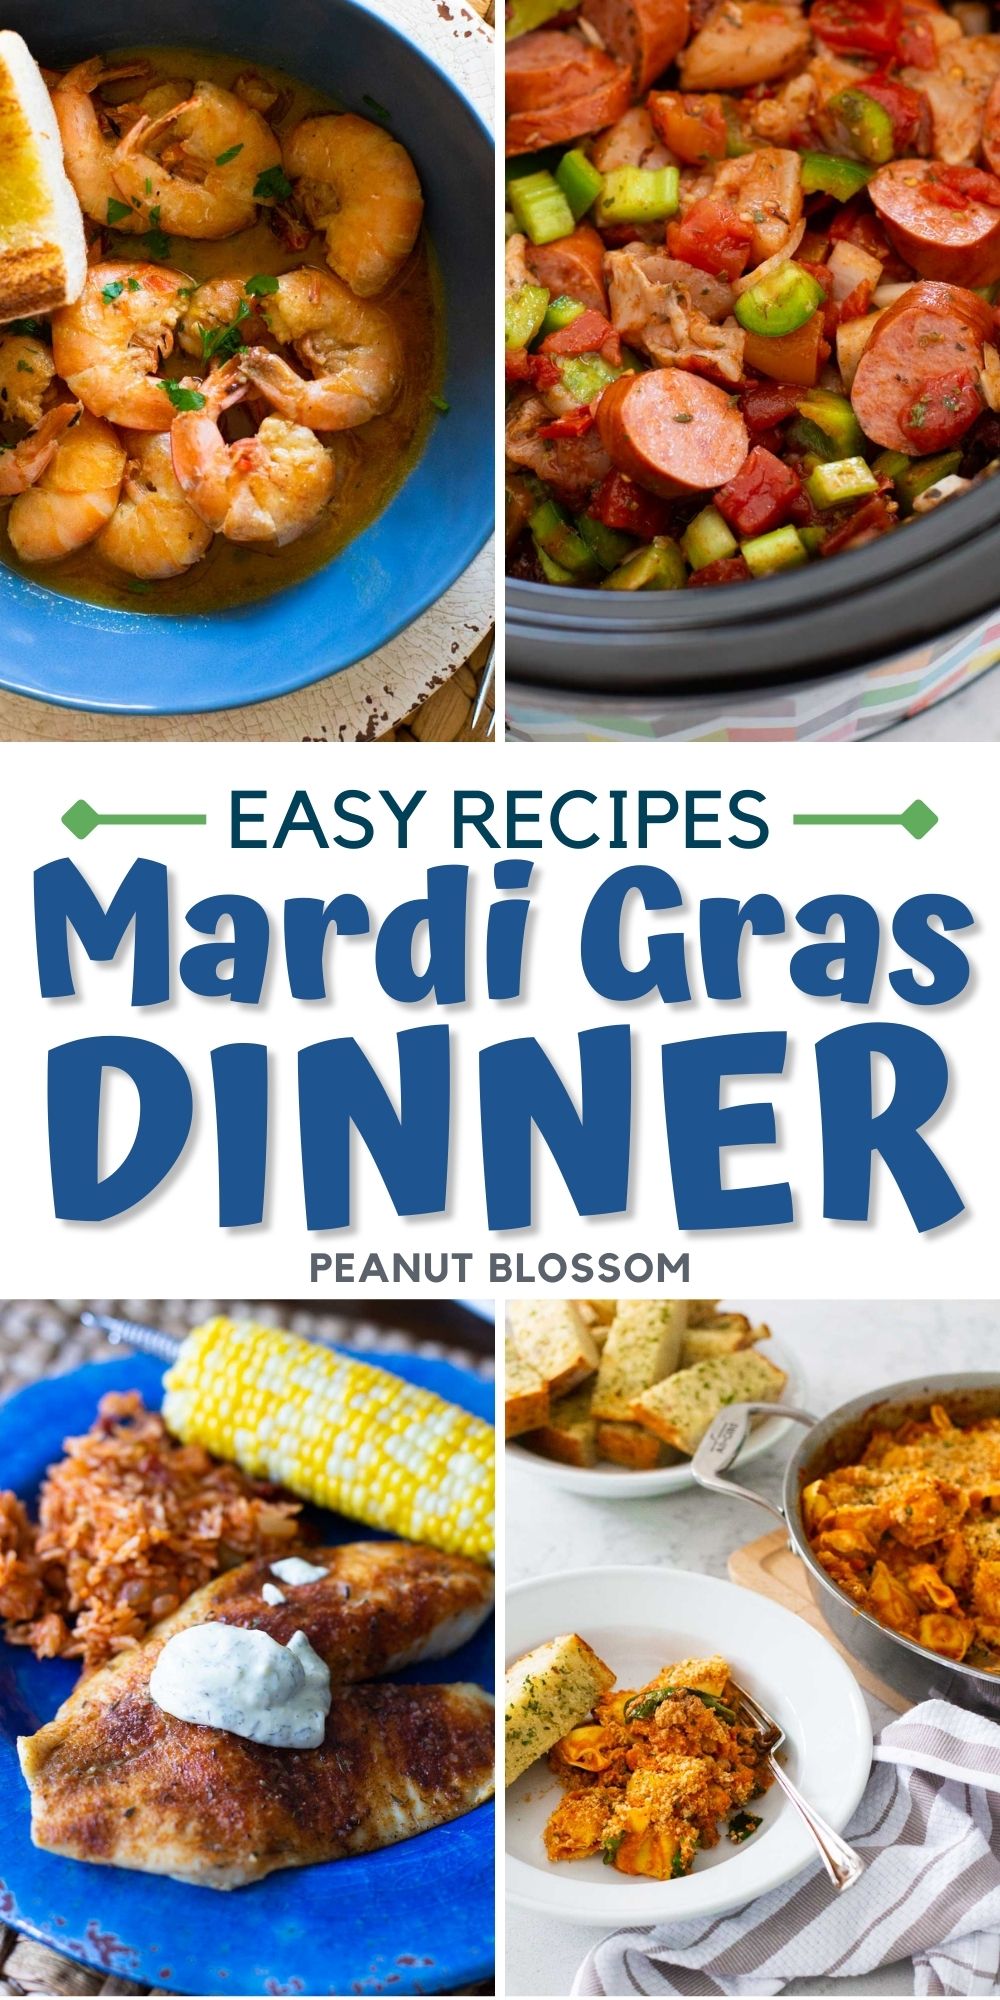 A photo collage shows 4 of the easy recipes for a family-friendly Mardi Gras dinner.